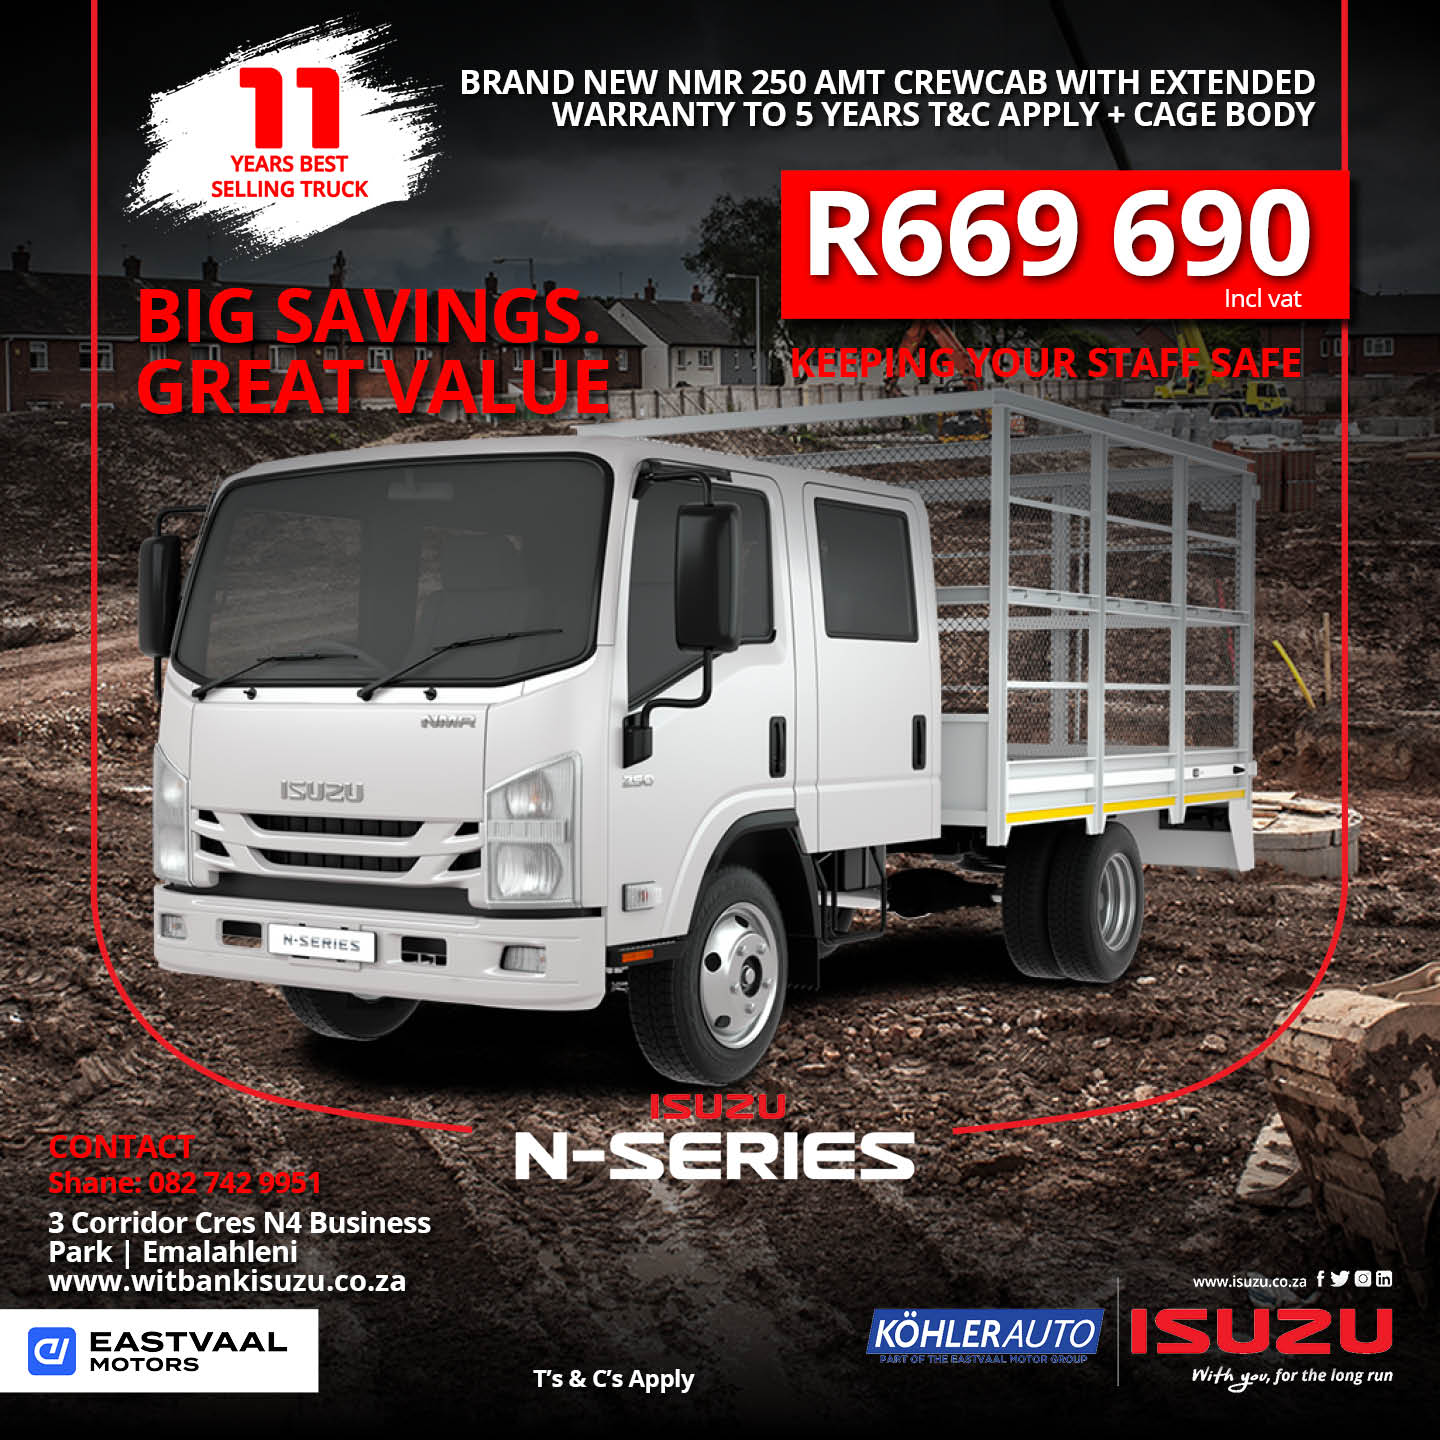 Keep your staff safe with the Isuzu NMR 250 AMT Crewcab image from 